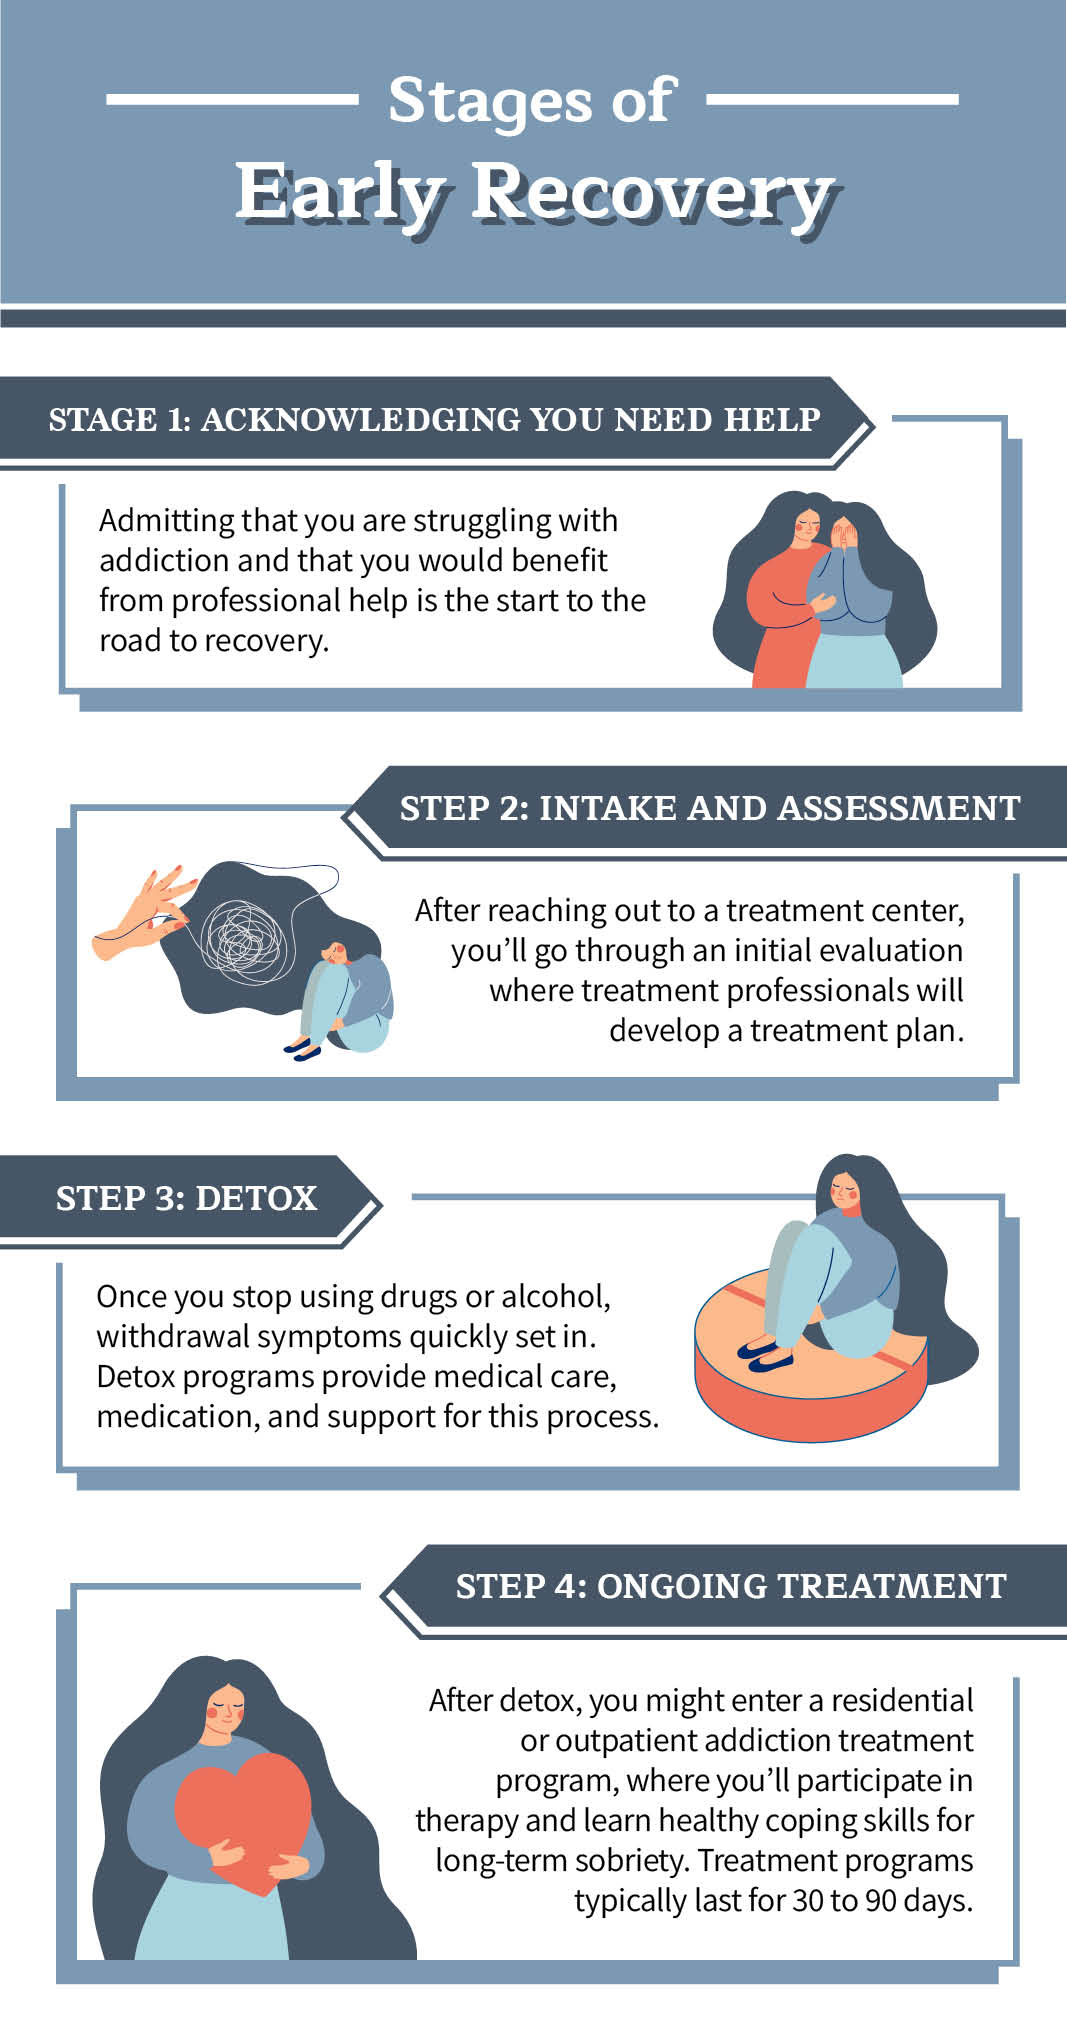 How Do I Find a Higher Power? - Drug and Alcohol Rehab/Detox In